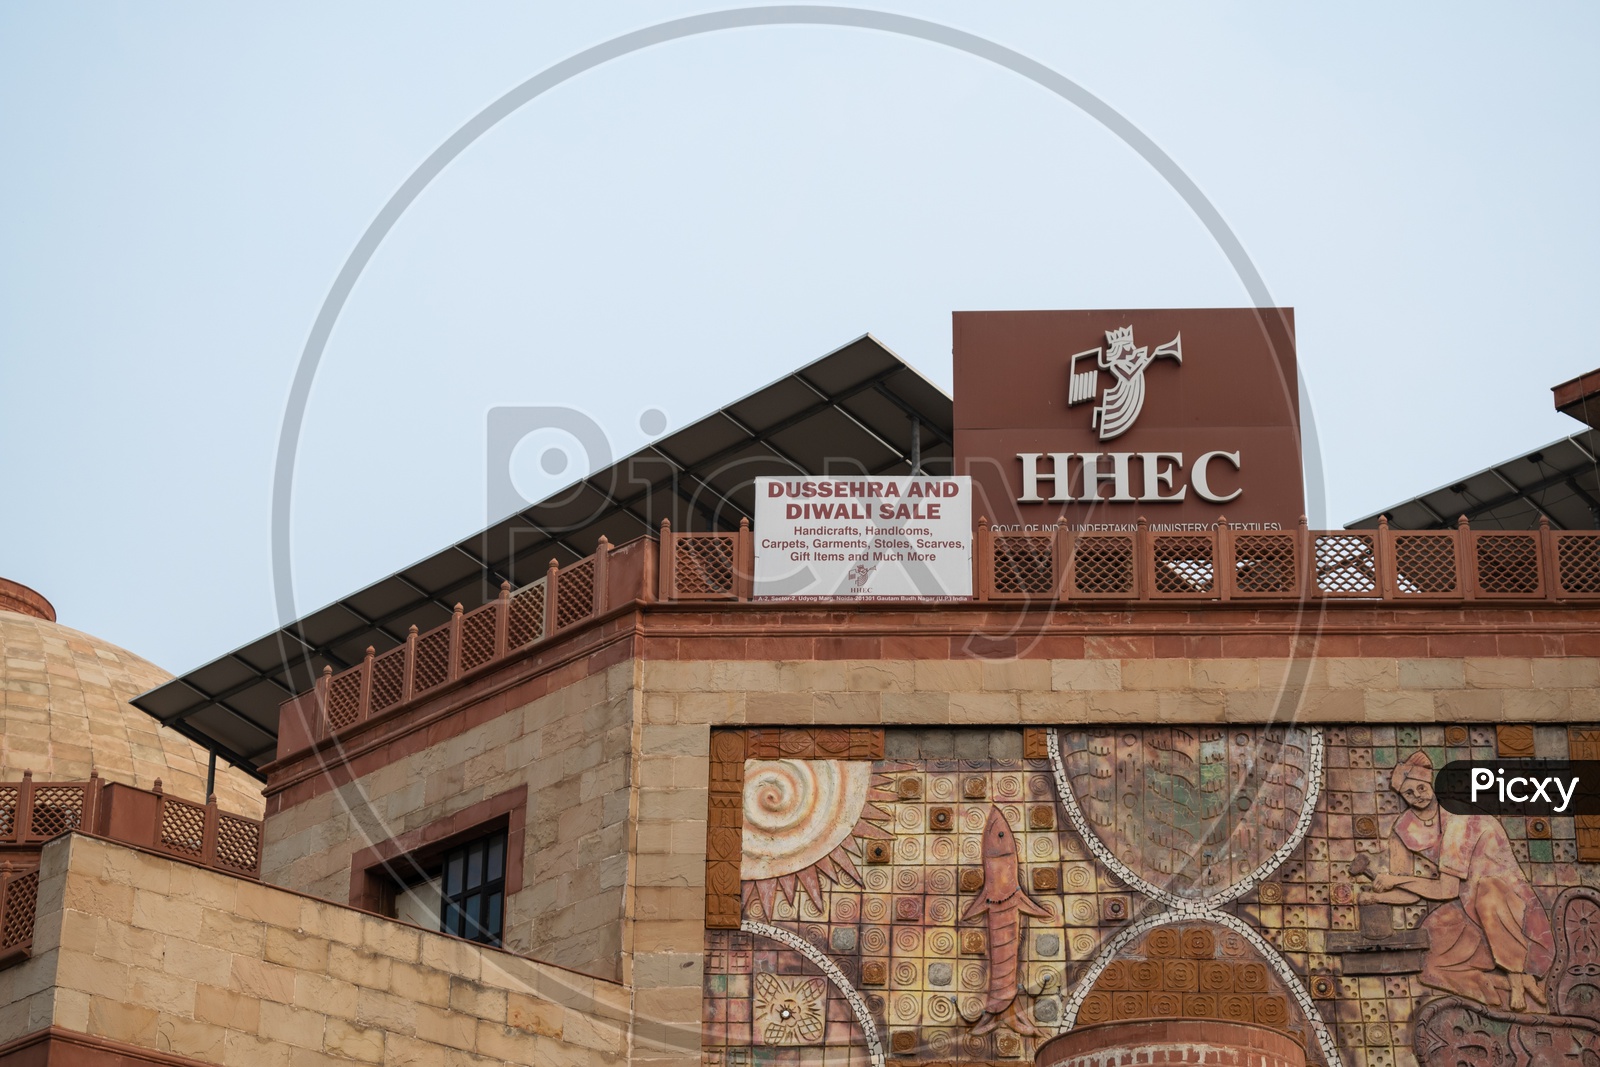 HHEC  Handicrafts And Handlooms Export Corporation Office by Government Of India Ministry Of Textiles  Building In Delhi